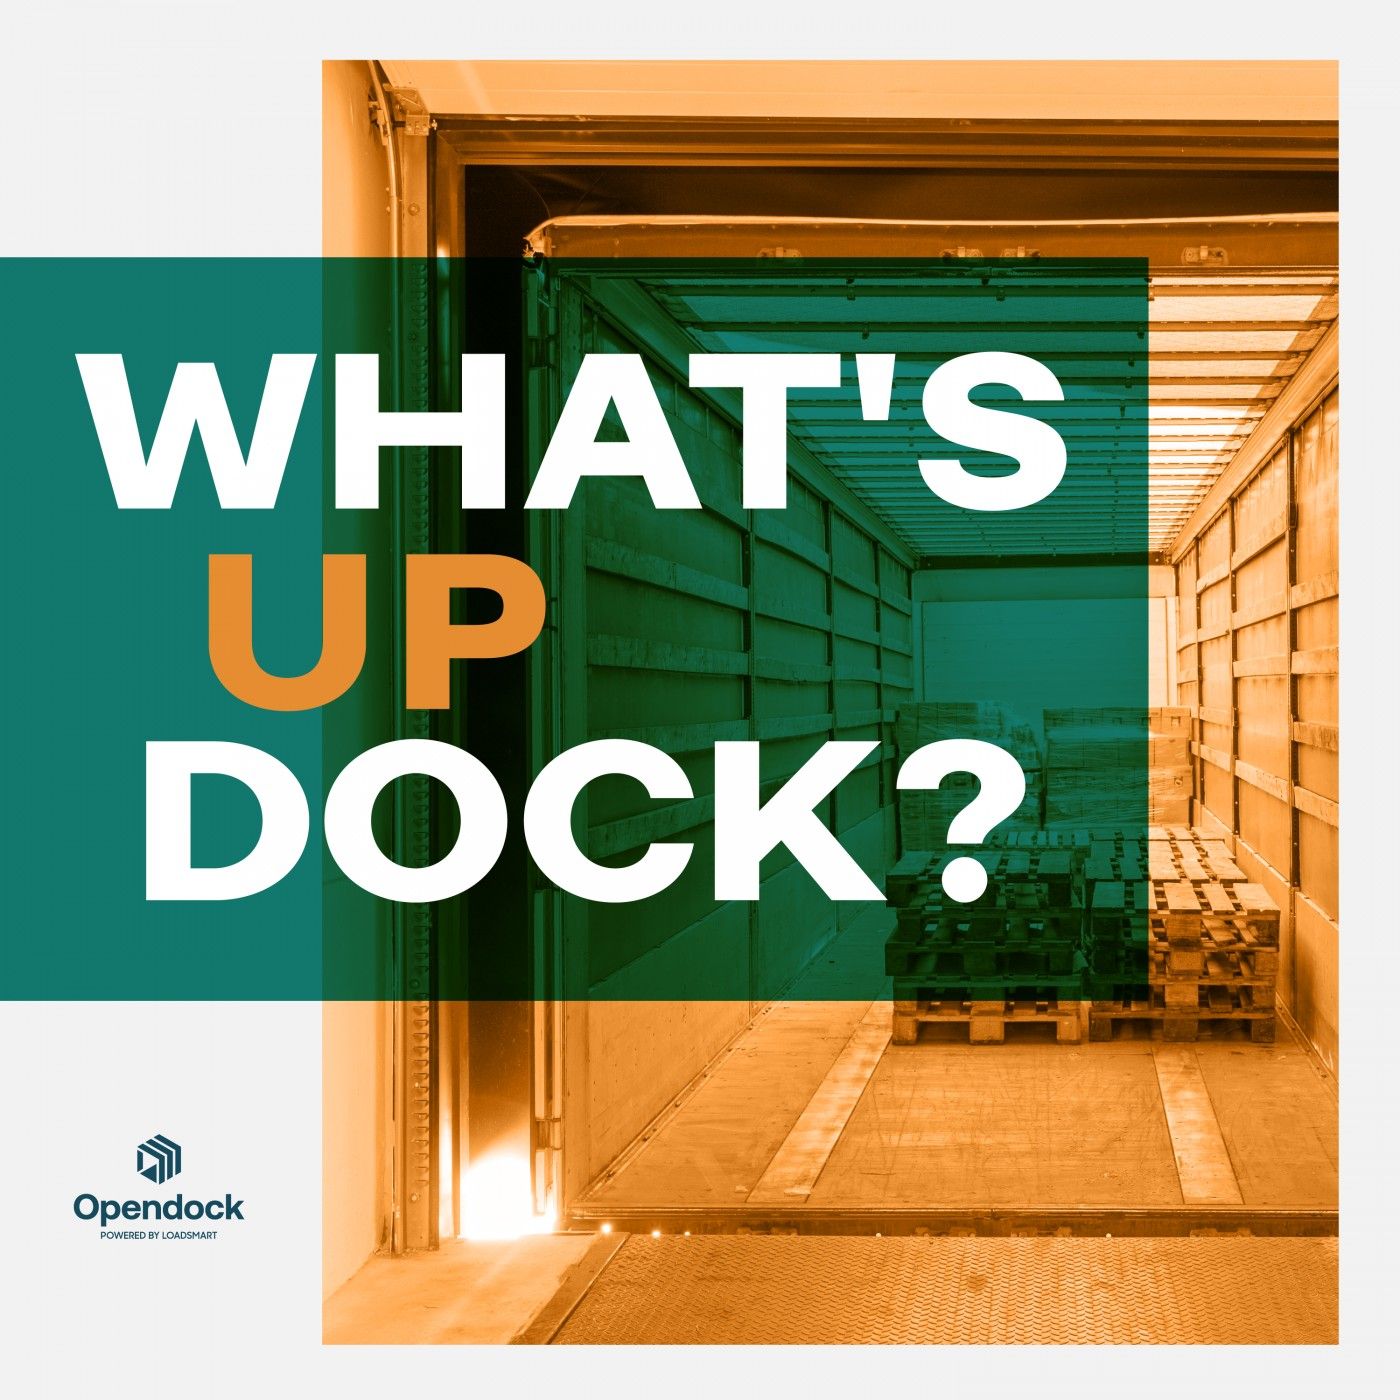 What’s Up Dock? A Look Inside the Warehousing World